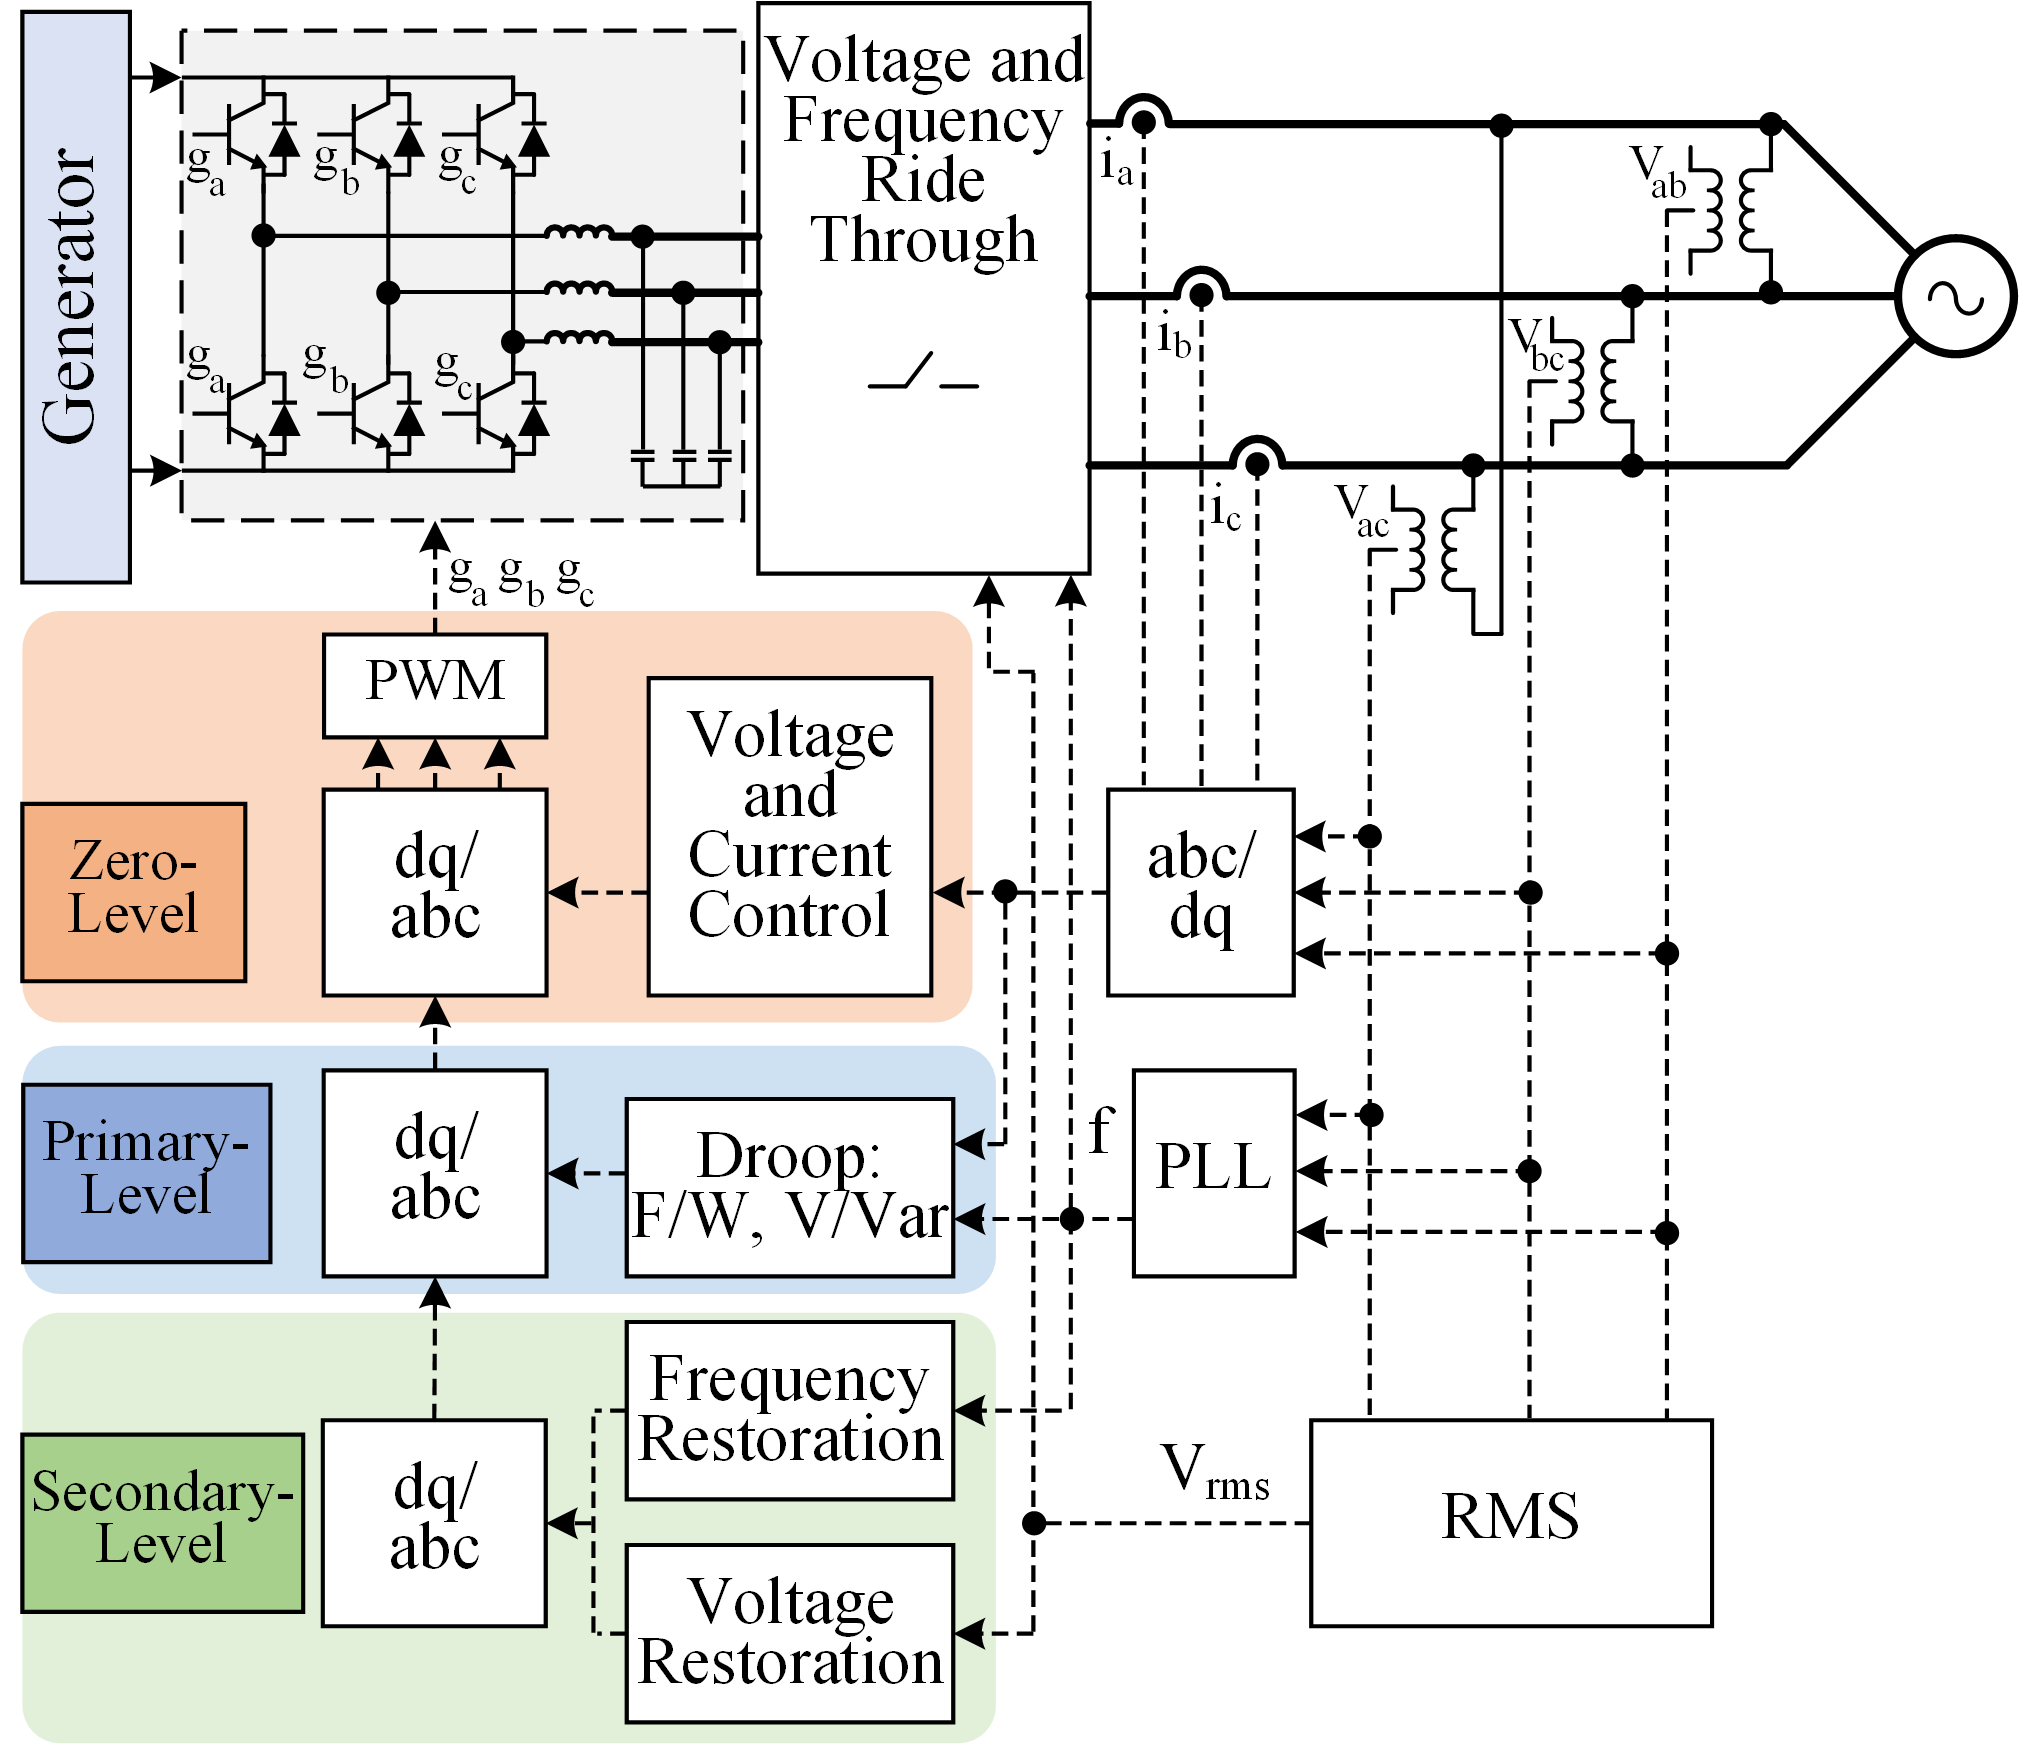 Choosing a Power Electronic Converter Model for Power System Analysis